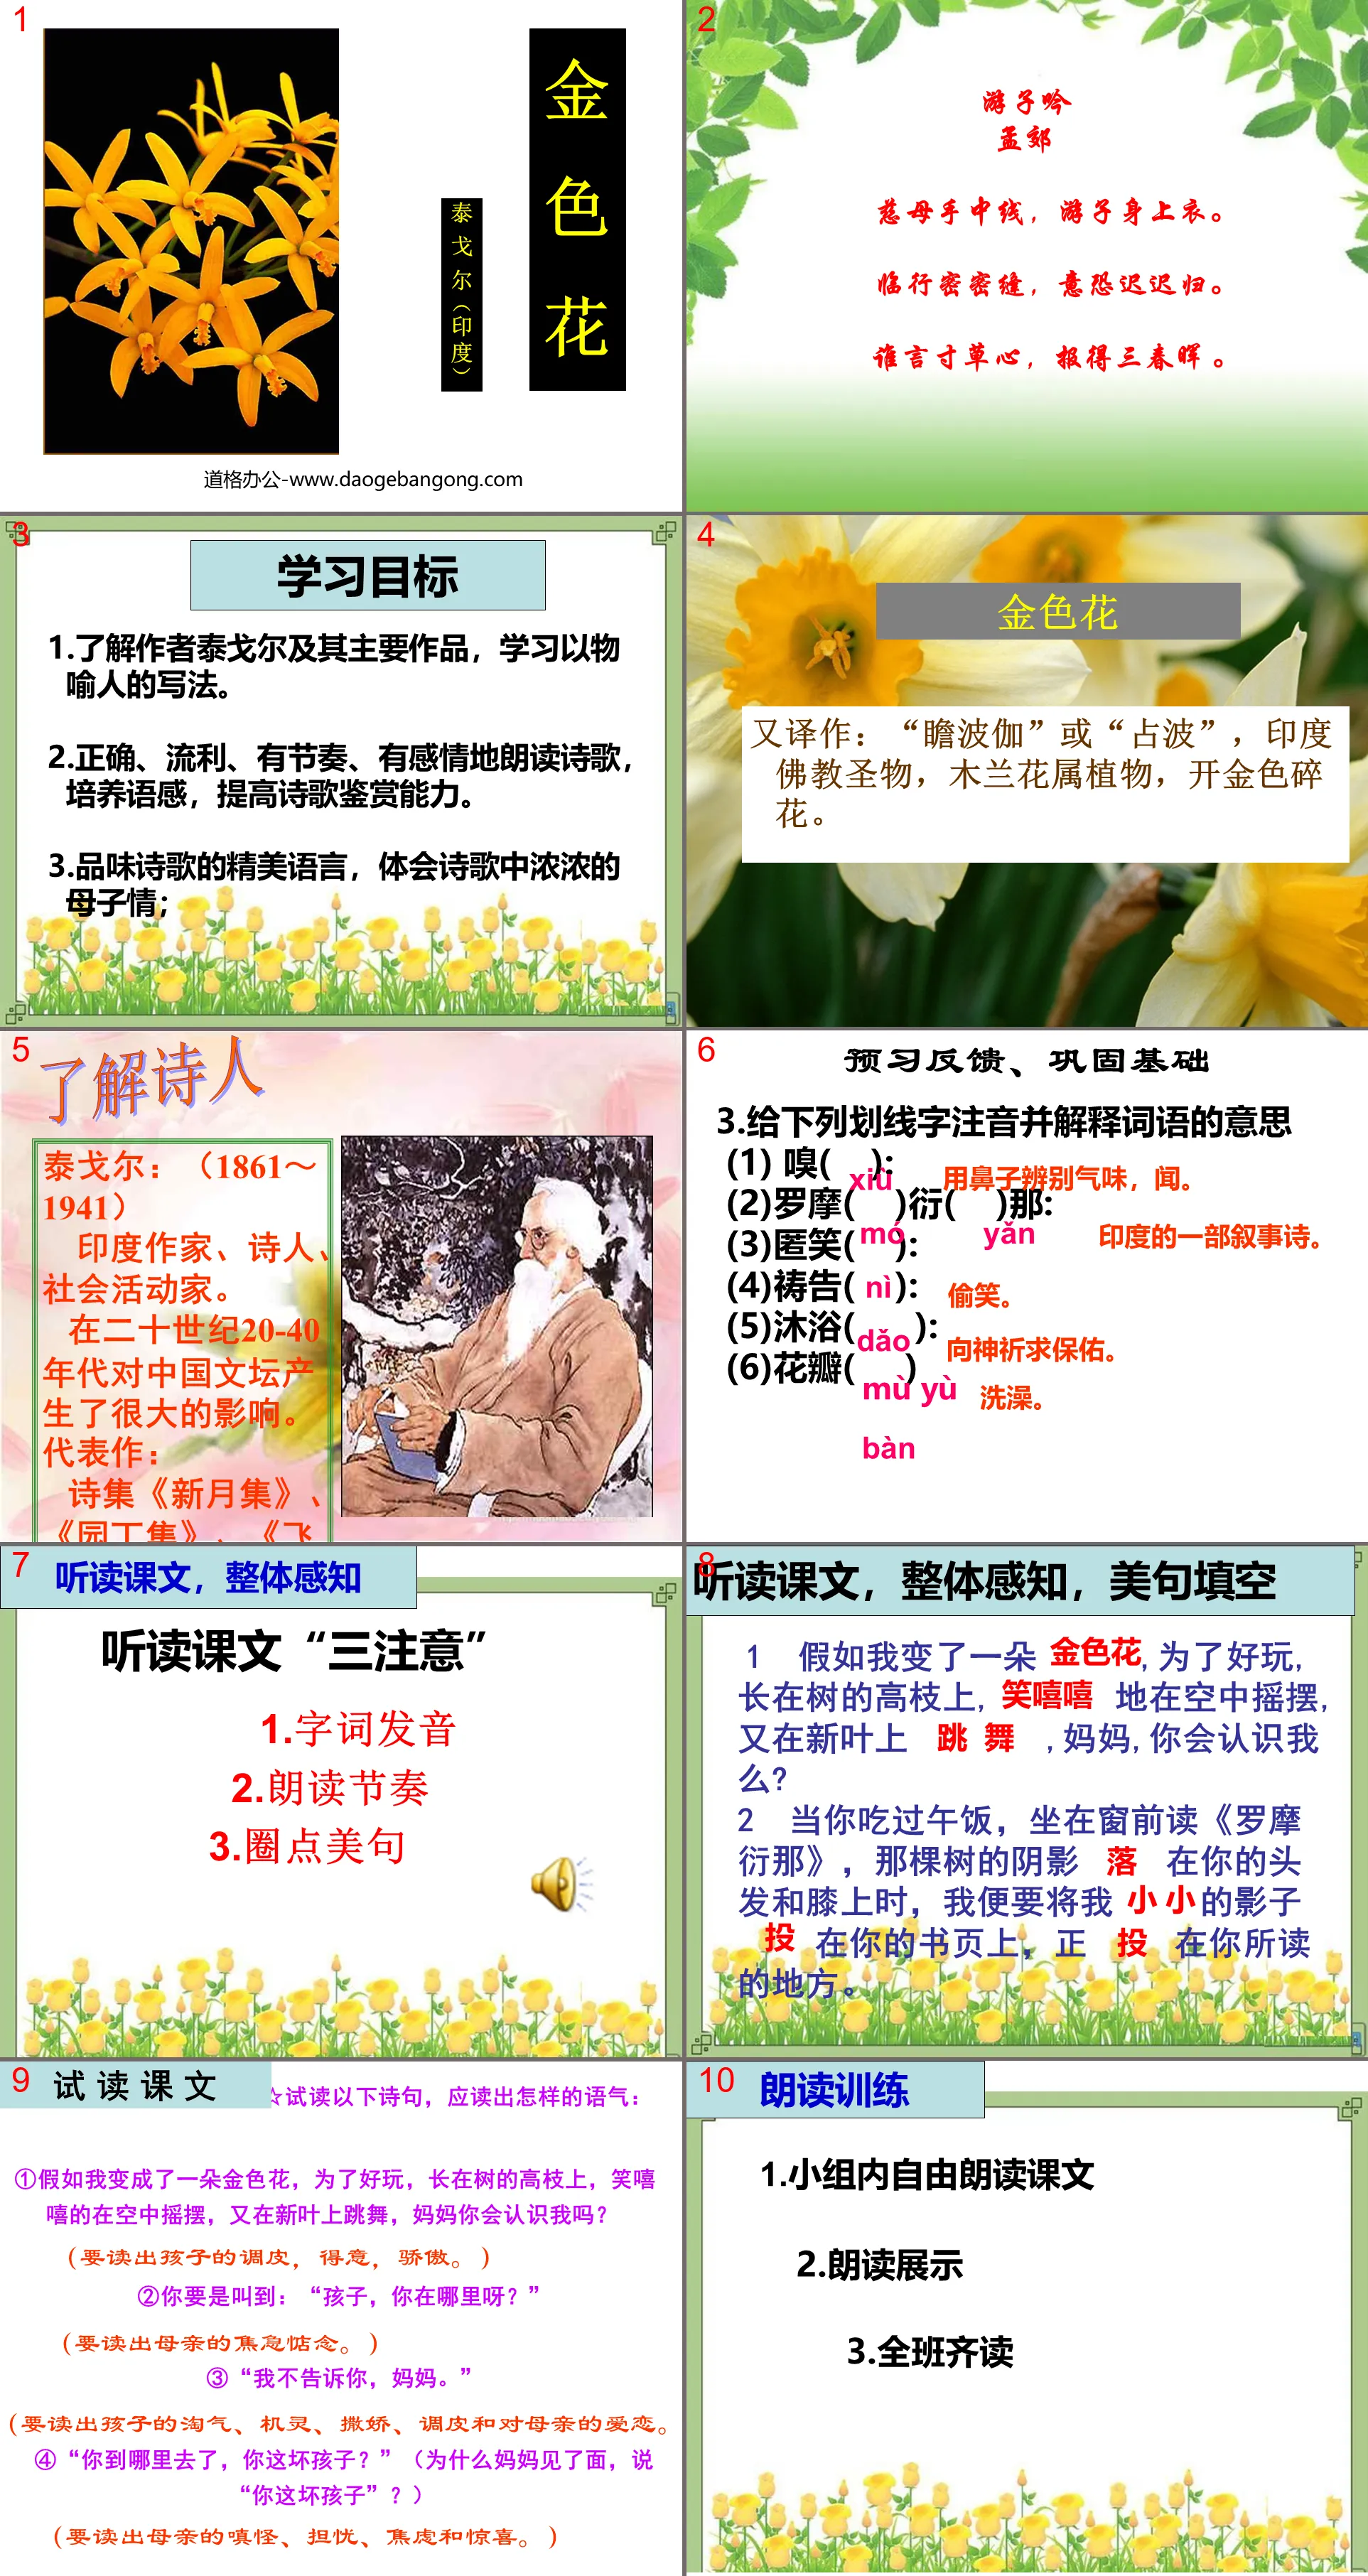 "Two Poems-Golden Flower" PPT courseware 7